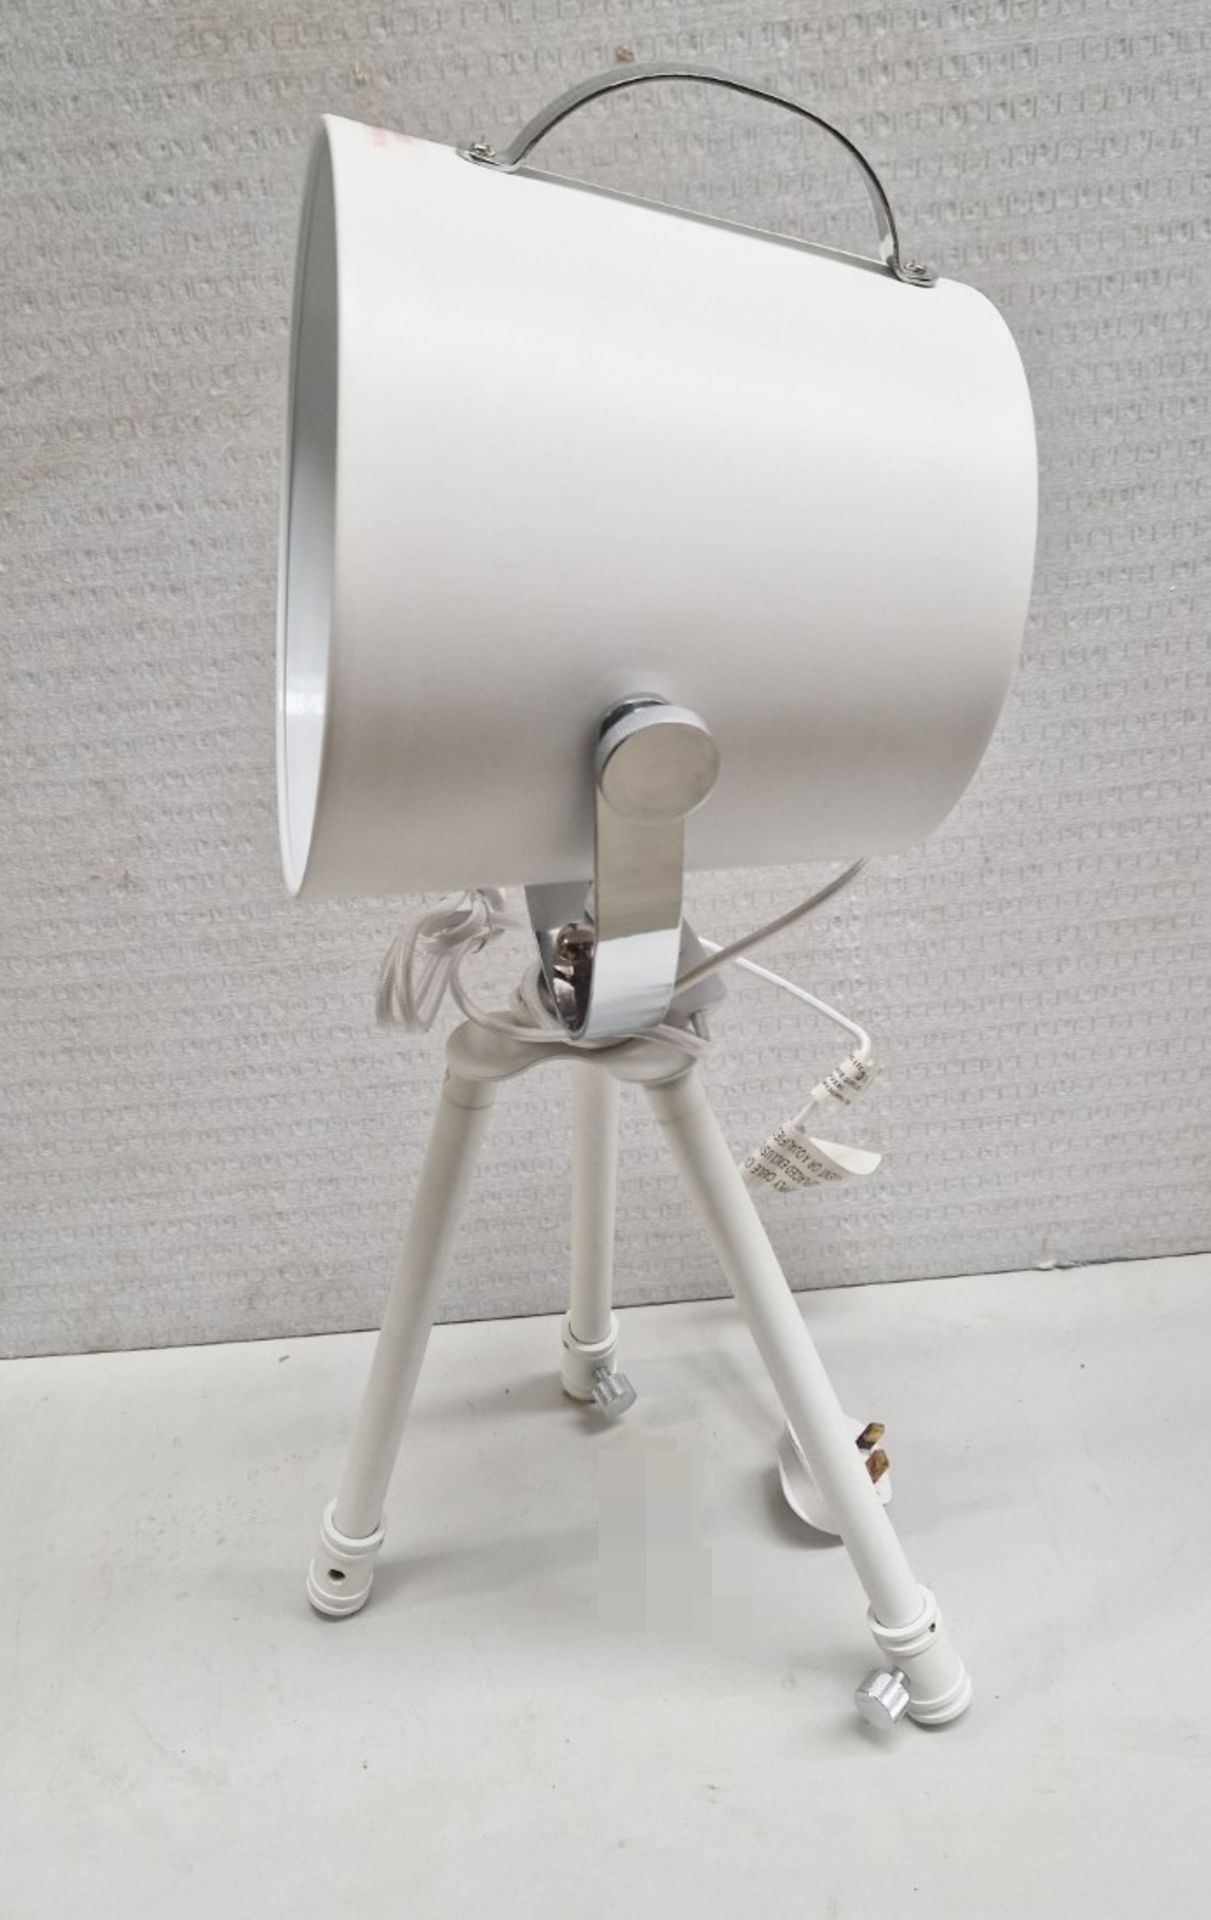 1 x Tripod Floor Lamp In White With Extendable Legs And Steel Handle